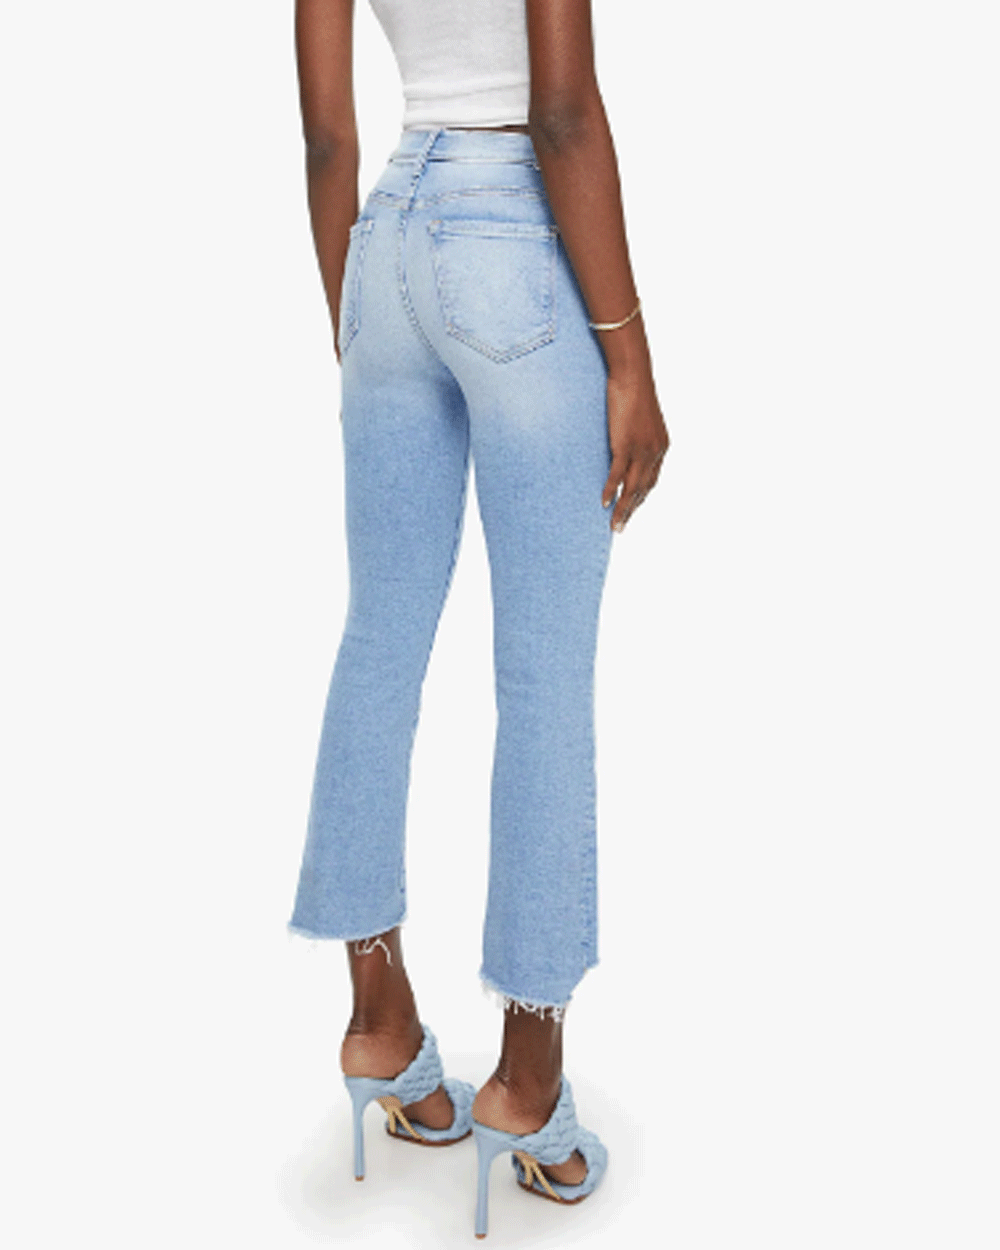 The Insider Crop Step Fray Jean in Lit